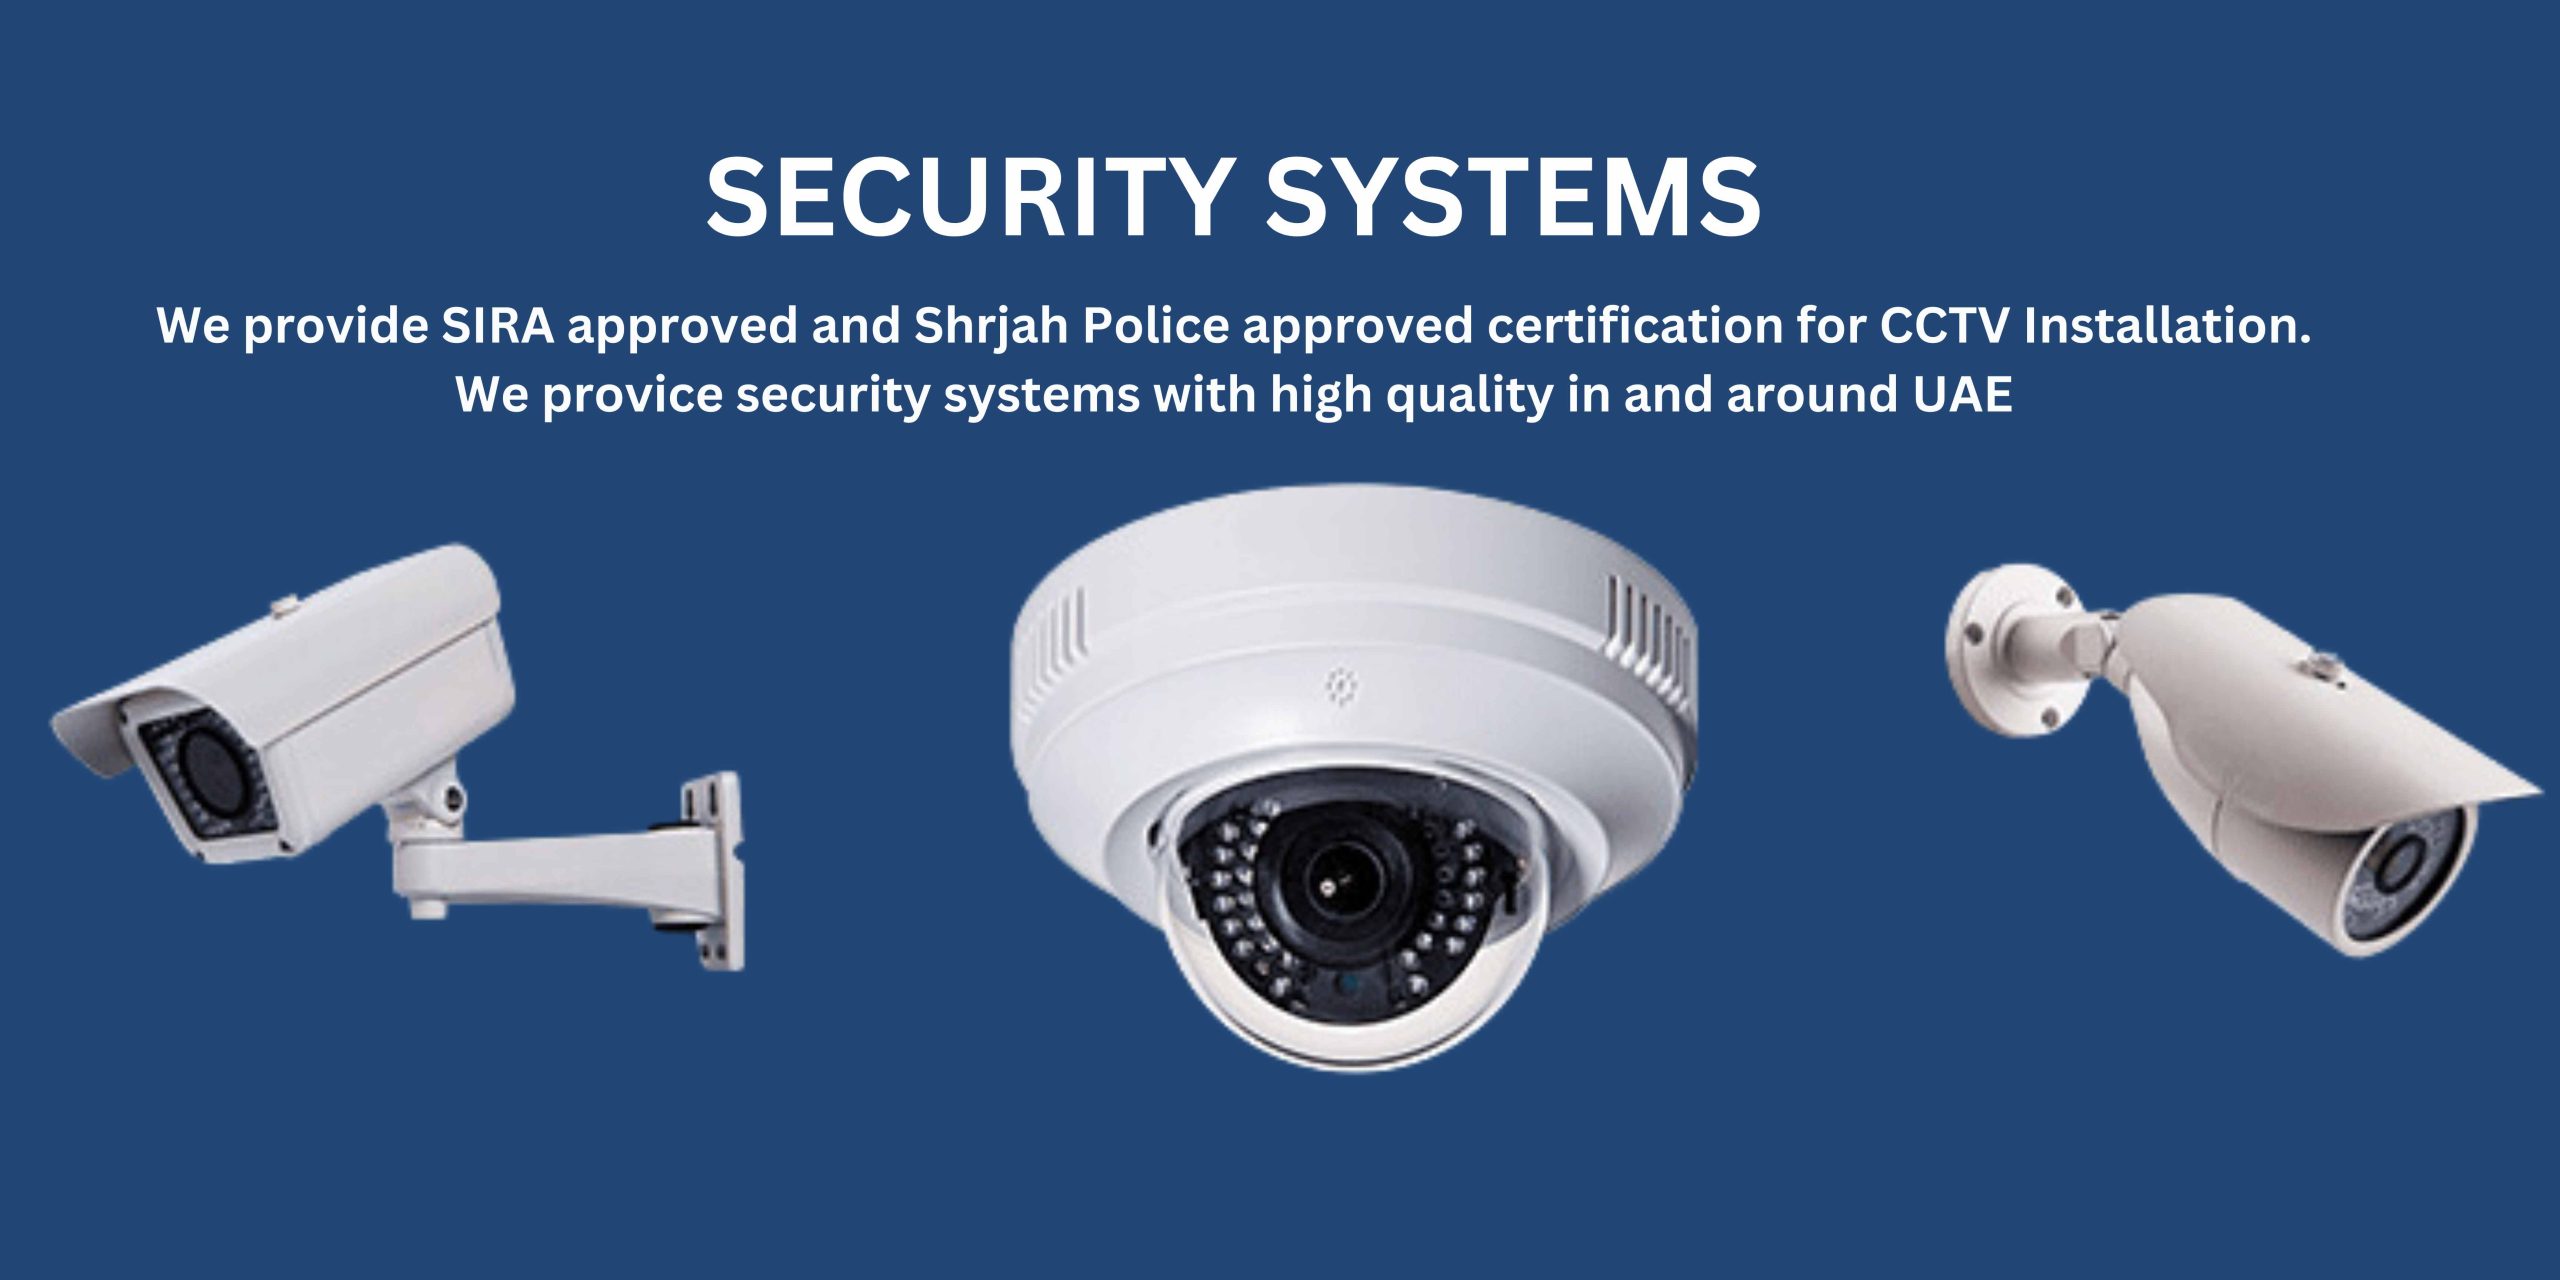 police approved cctv company in sharjah